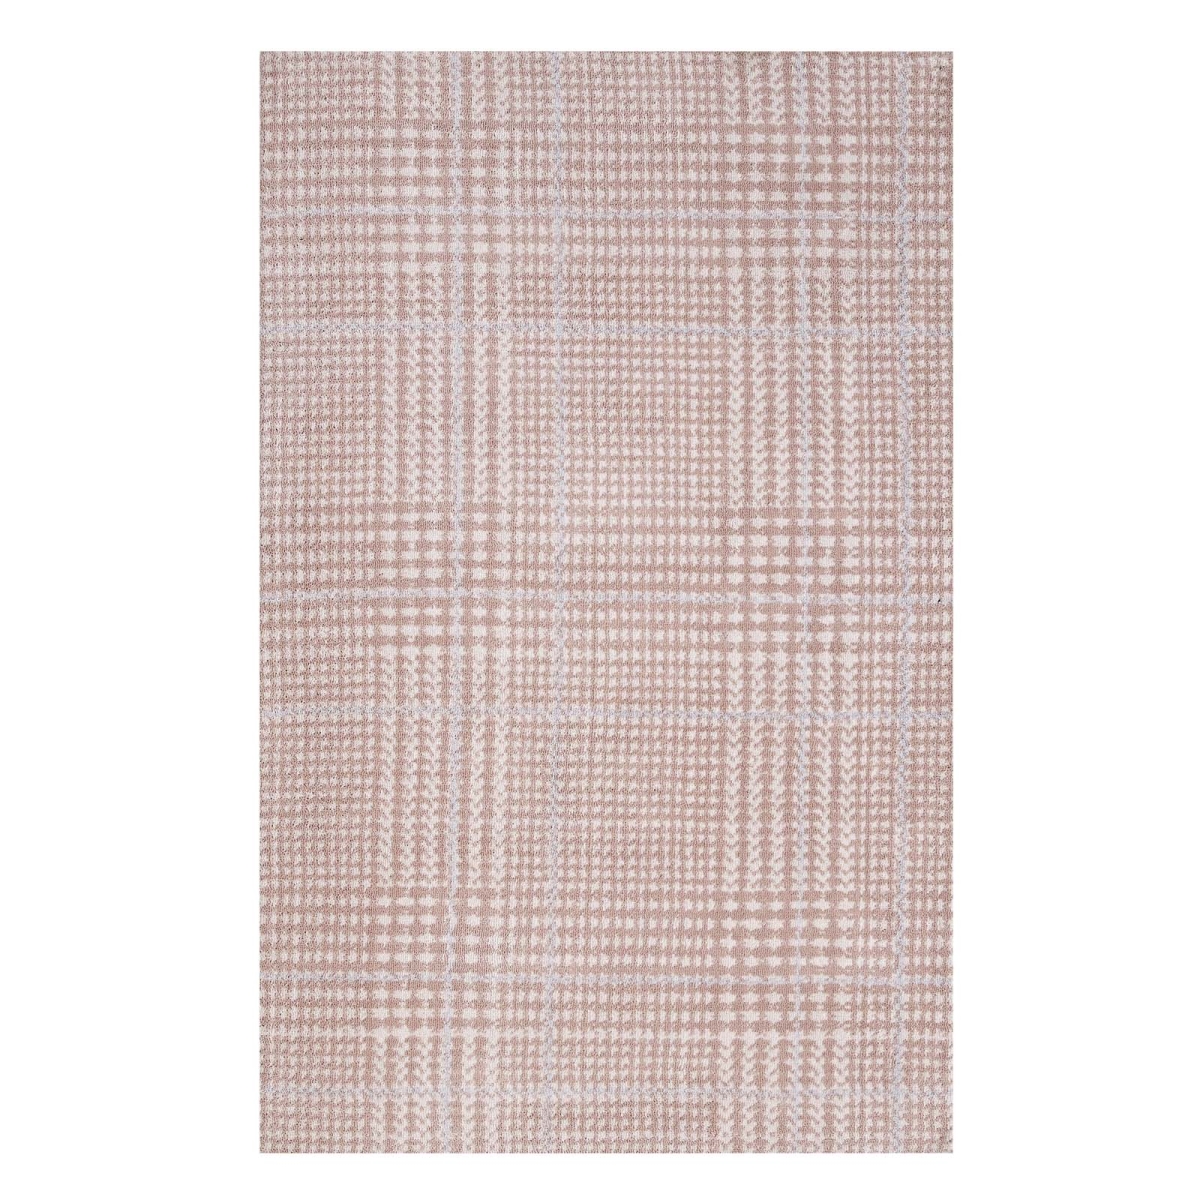 R-1024b-810 8 X 10 Ft. Kaja Abstract Plaid Polyester Area Rug - Ivory, Cameo Rose & Light Blue, 0.5 X 96 X 120 In.